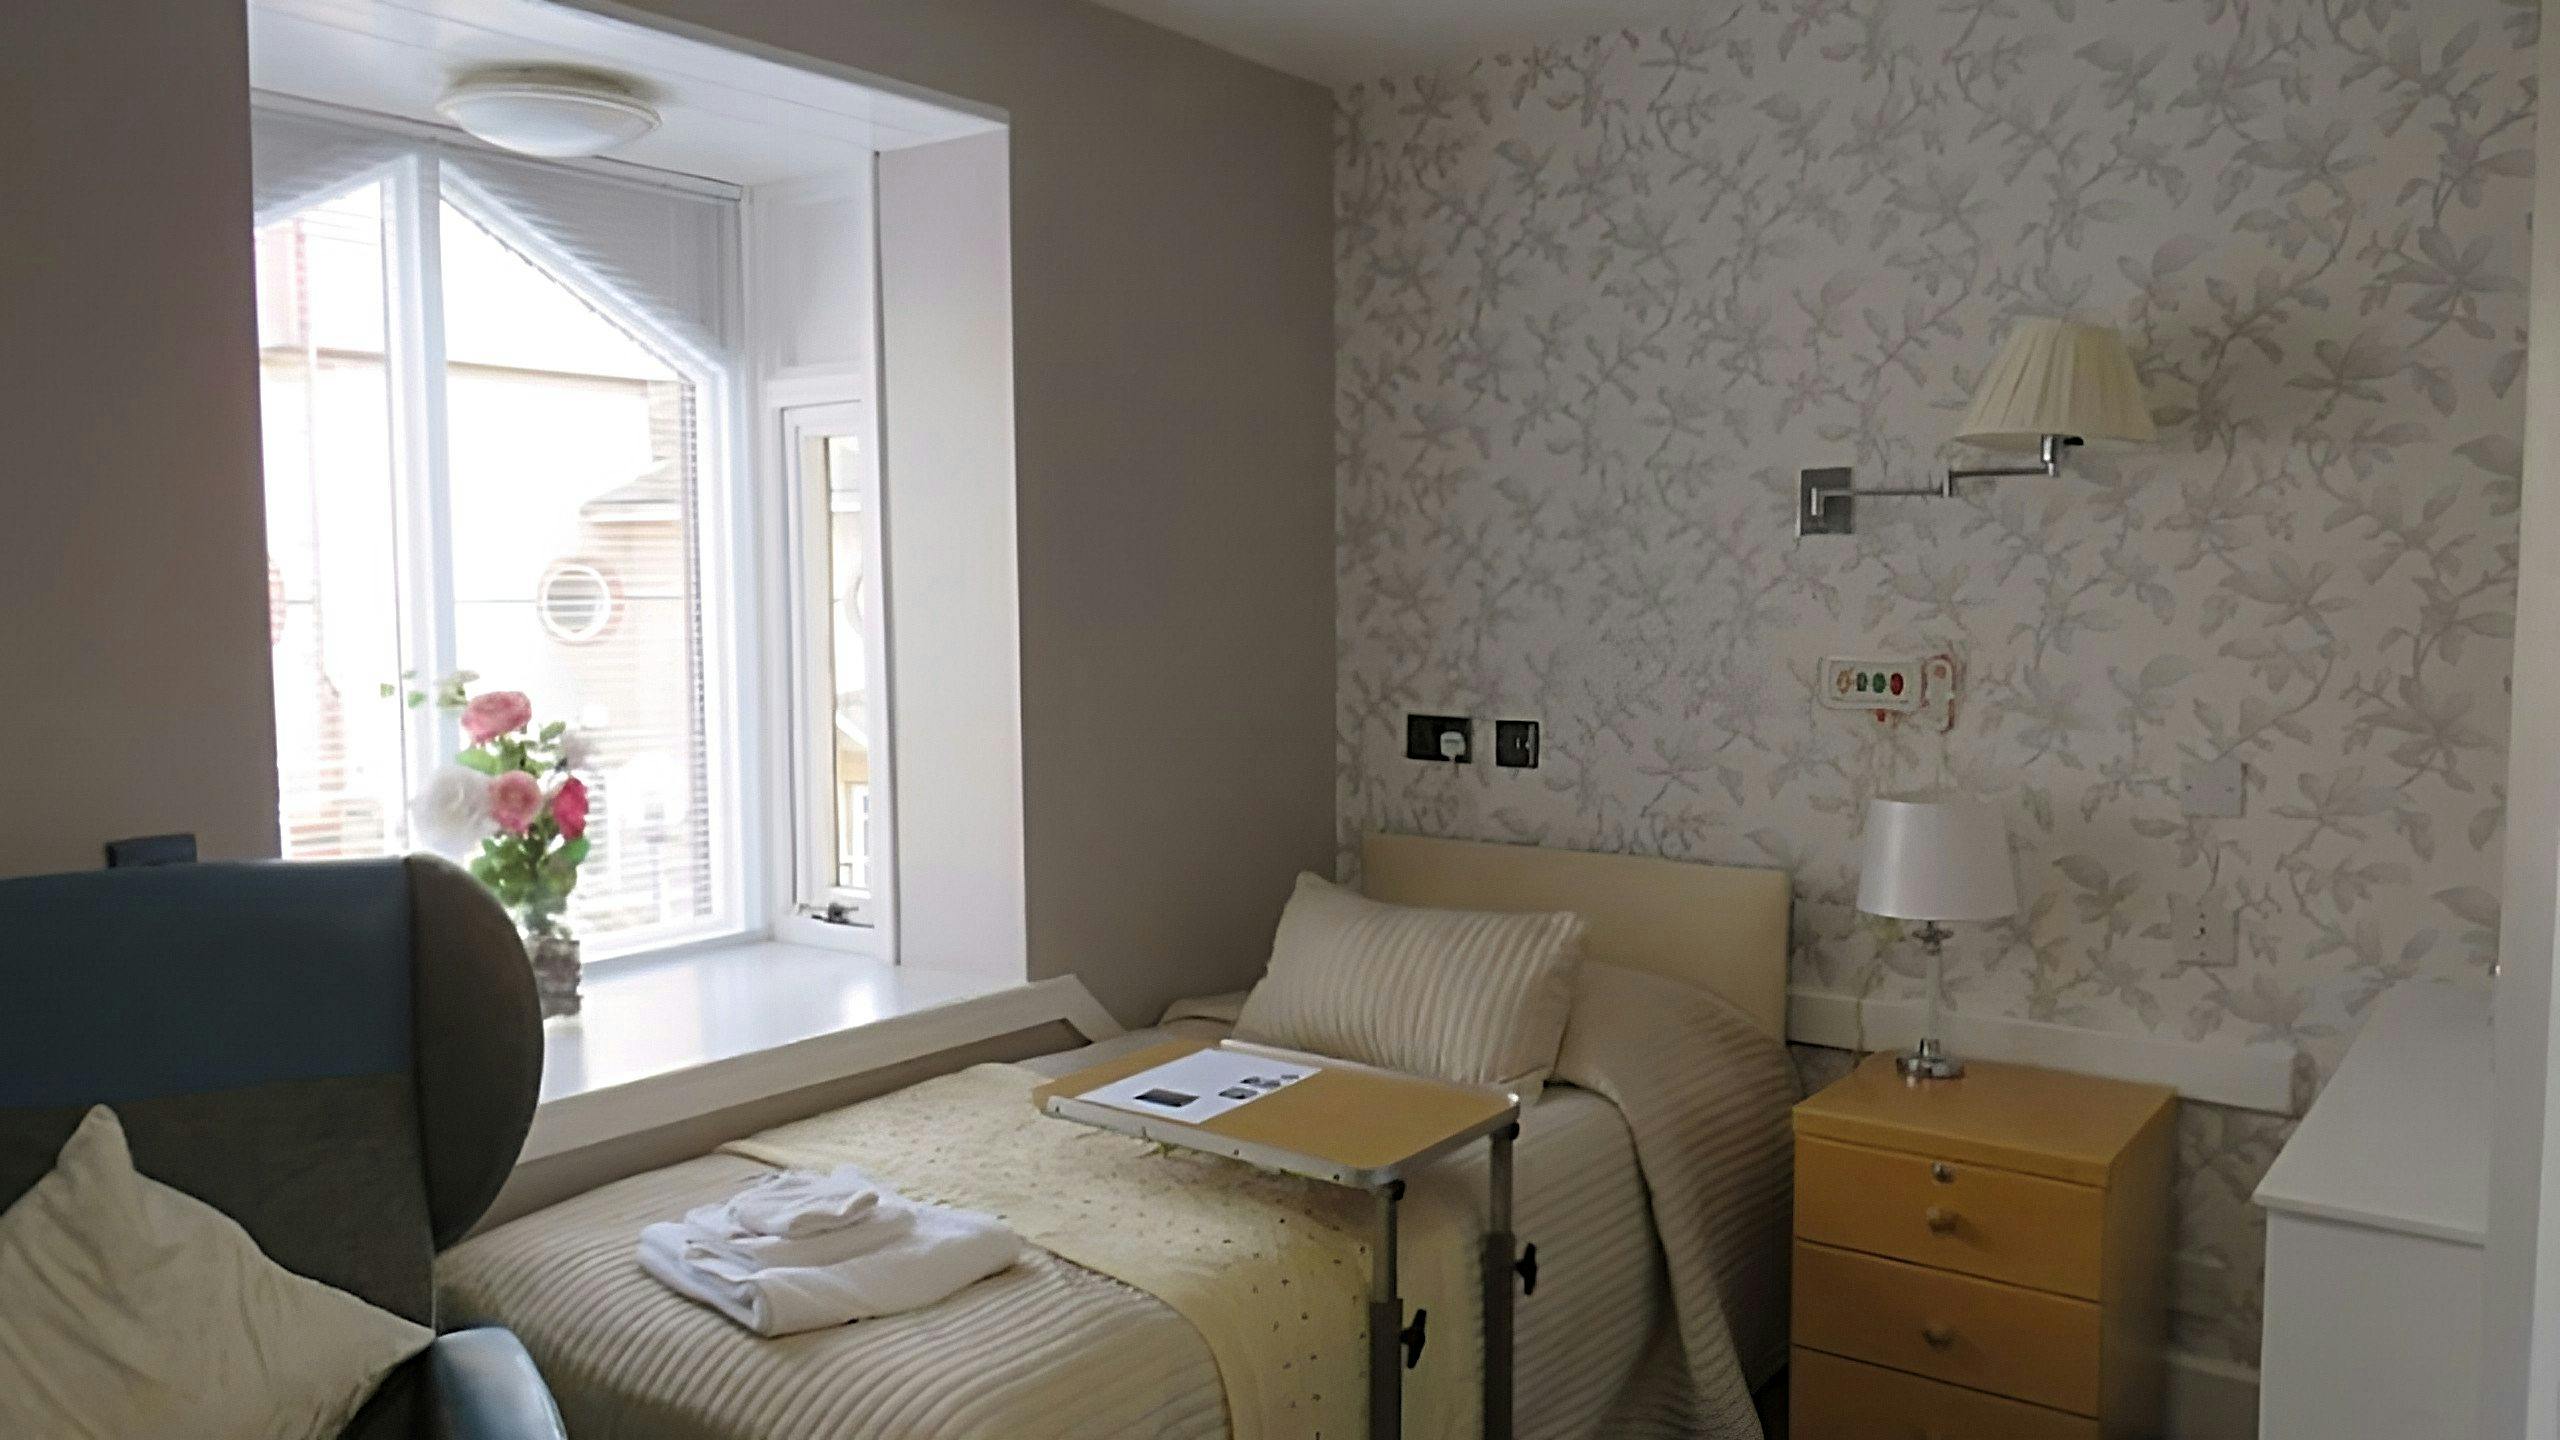 Countrywide - White Rose Lodge care home 6